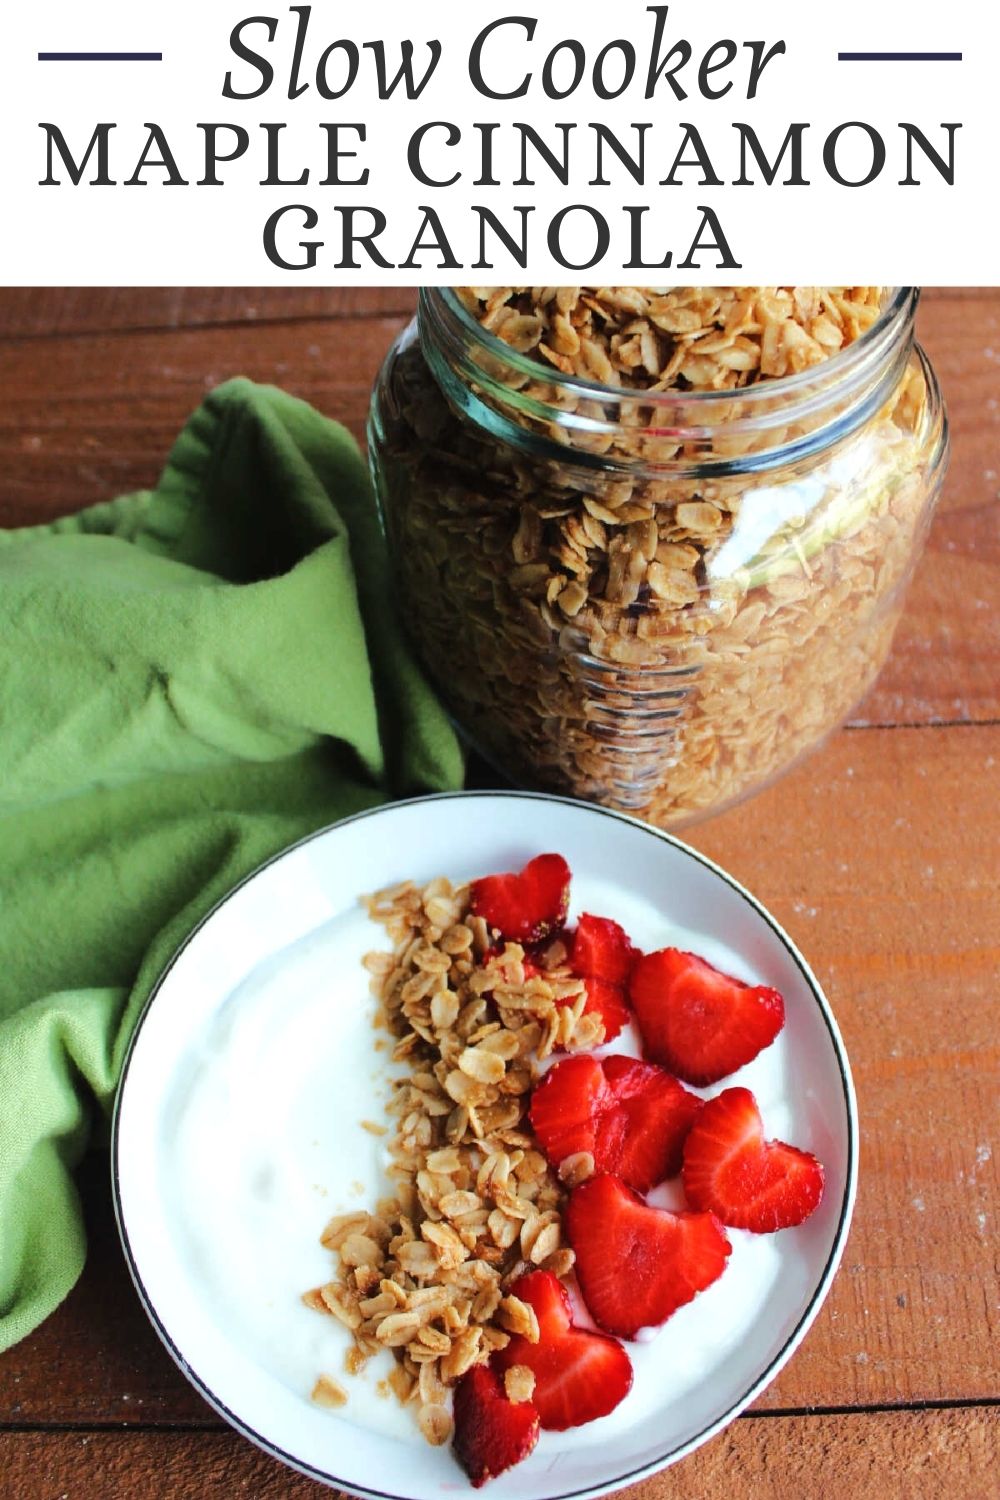 This slow cooker maple cinnamon granola could not be easier to make. It is sweet, crunchy and perfect as a snack or breakfast. 